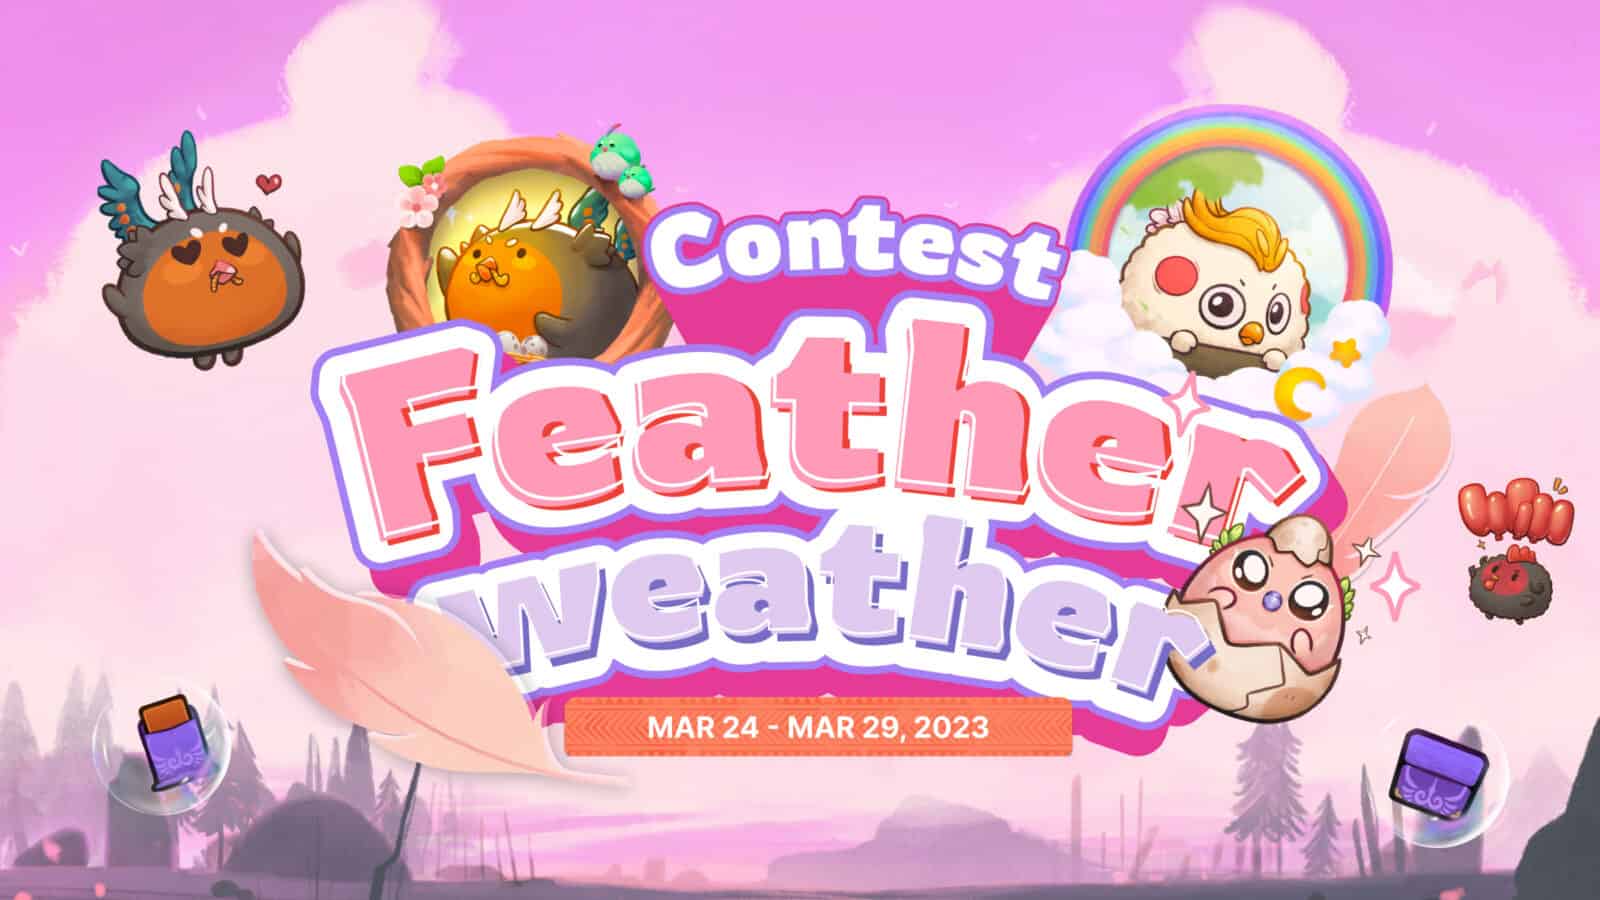 Celebrate the Ending of Axie Infinity Season 3 Epic Era With the Feather Weather Contest